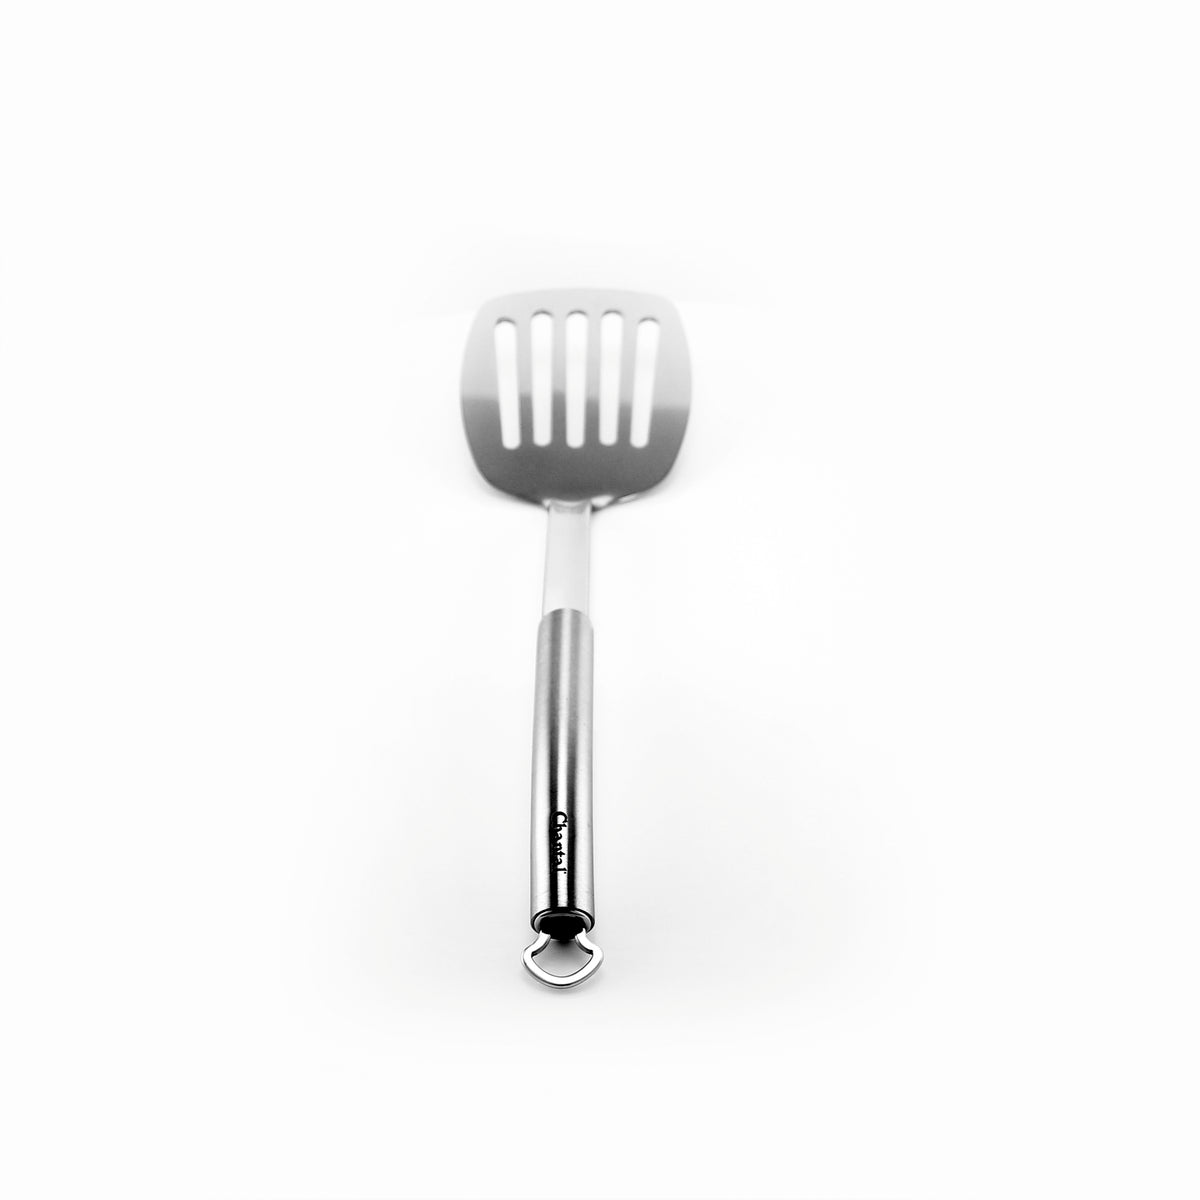 Dropship Short Slotted Turner Stainless Steel Flat Spatula For